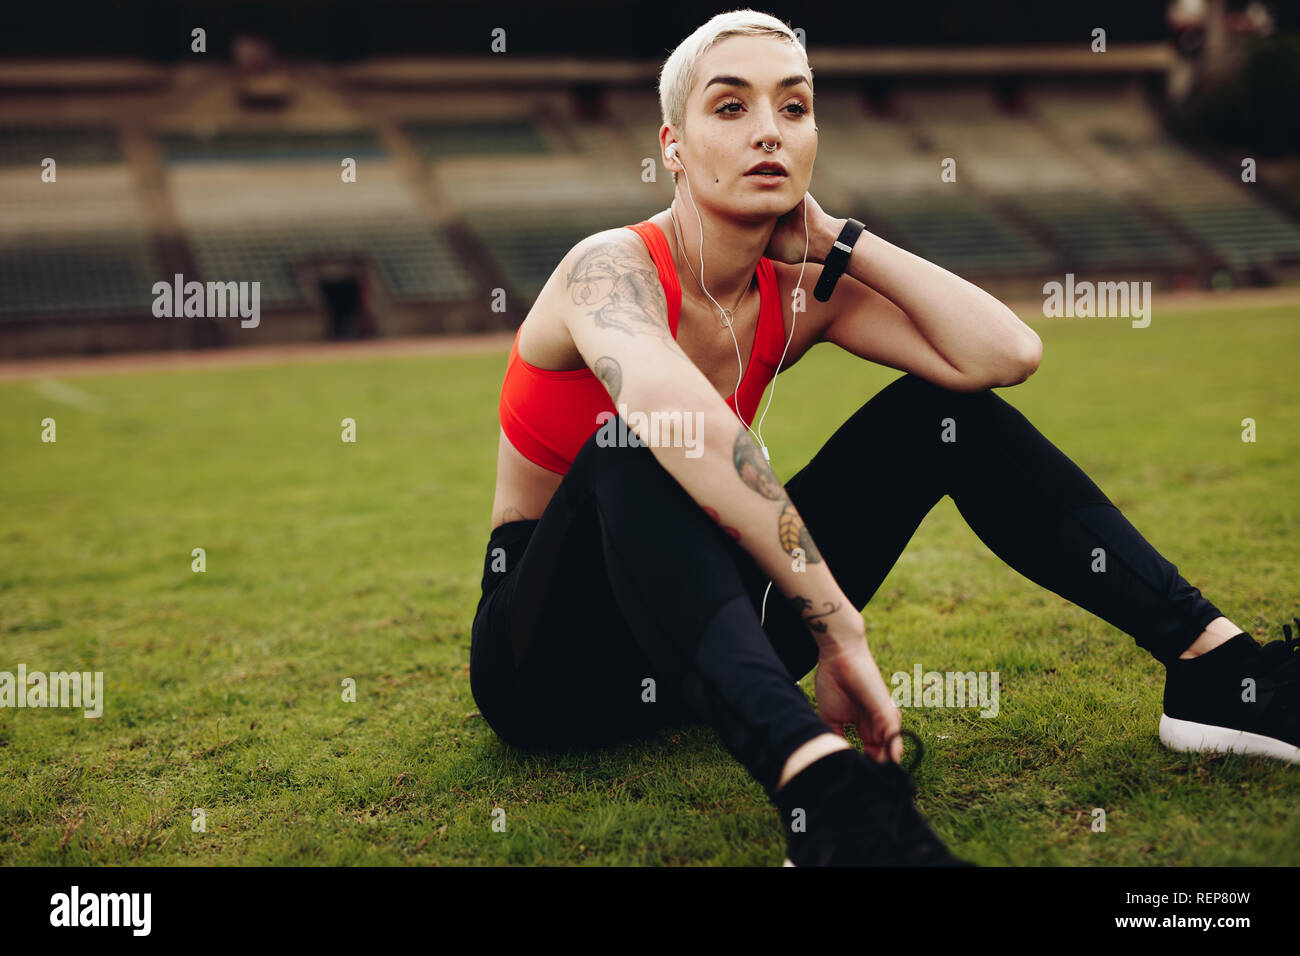 Female athlete sitting on grass listening to music on earphones. Woman runner relaxing after her workout in a track and field stadium. Stock Photo